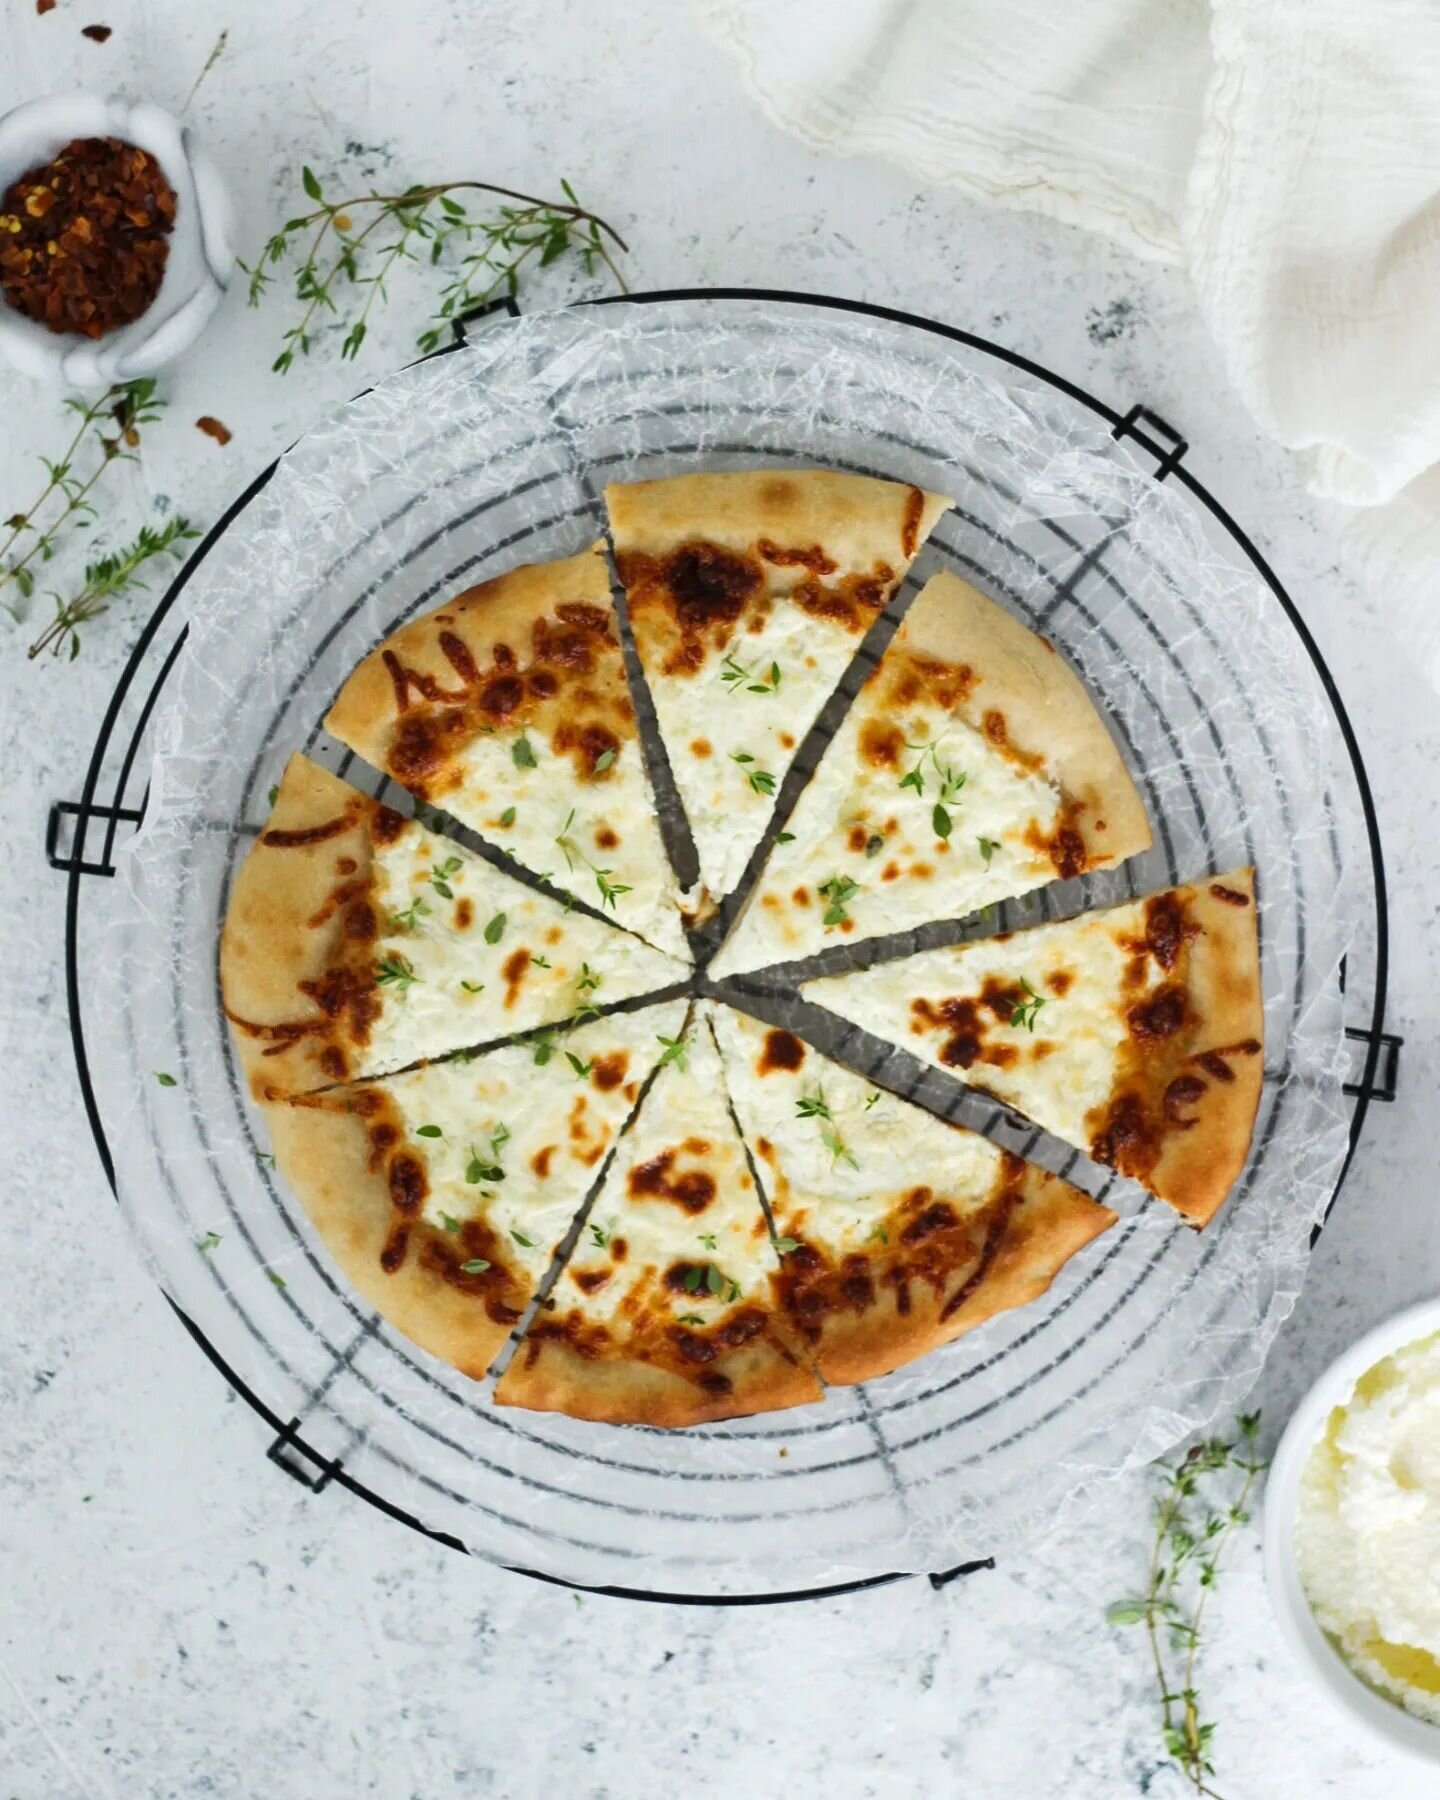 Pizza night is a weekly tradition in our house and this white pizza has recently been added to the line up!

This pizza is made with Galbani Lactose Free Ricotta and just a few other simple ingredients (no sauce needed). It will easily become your ne